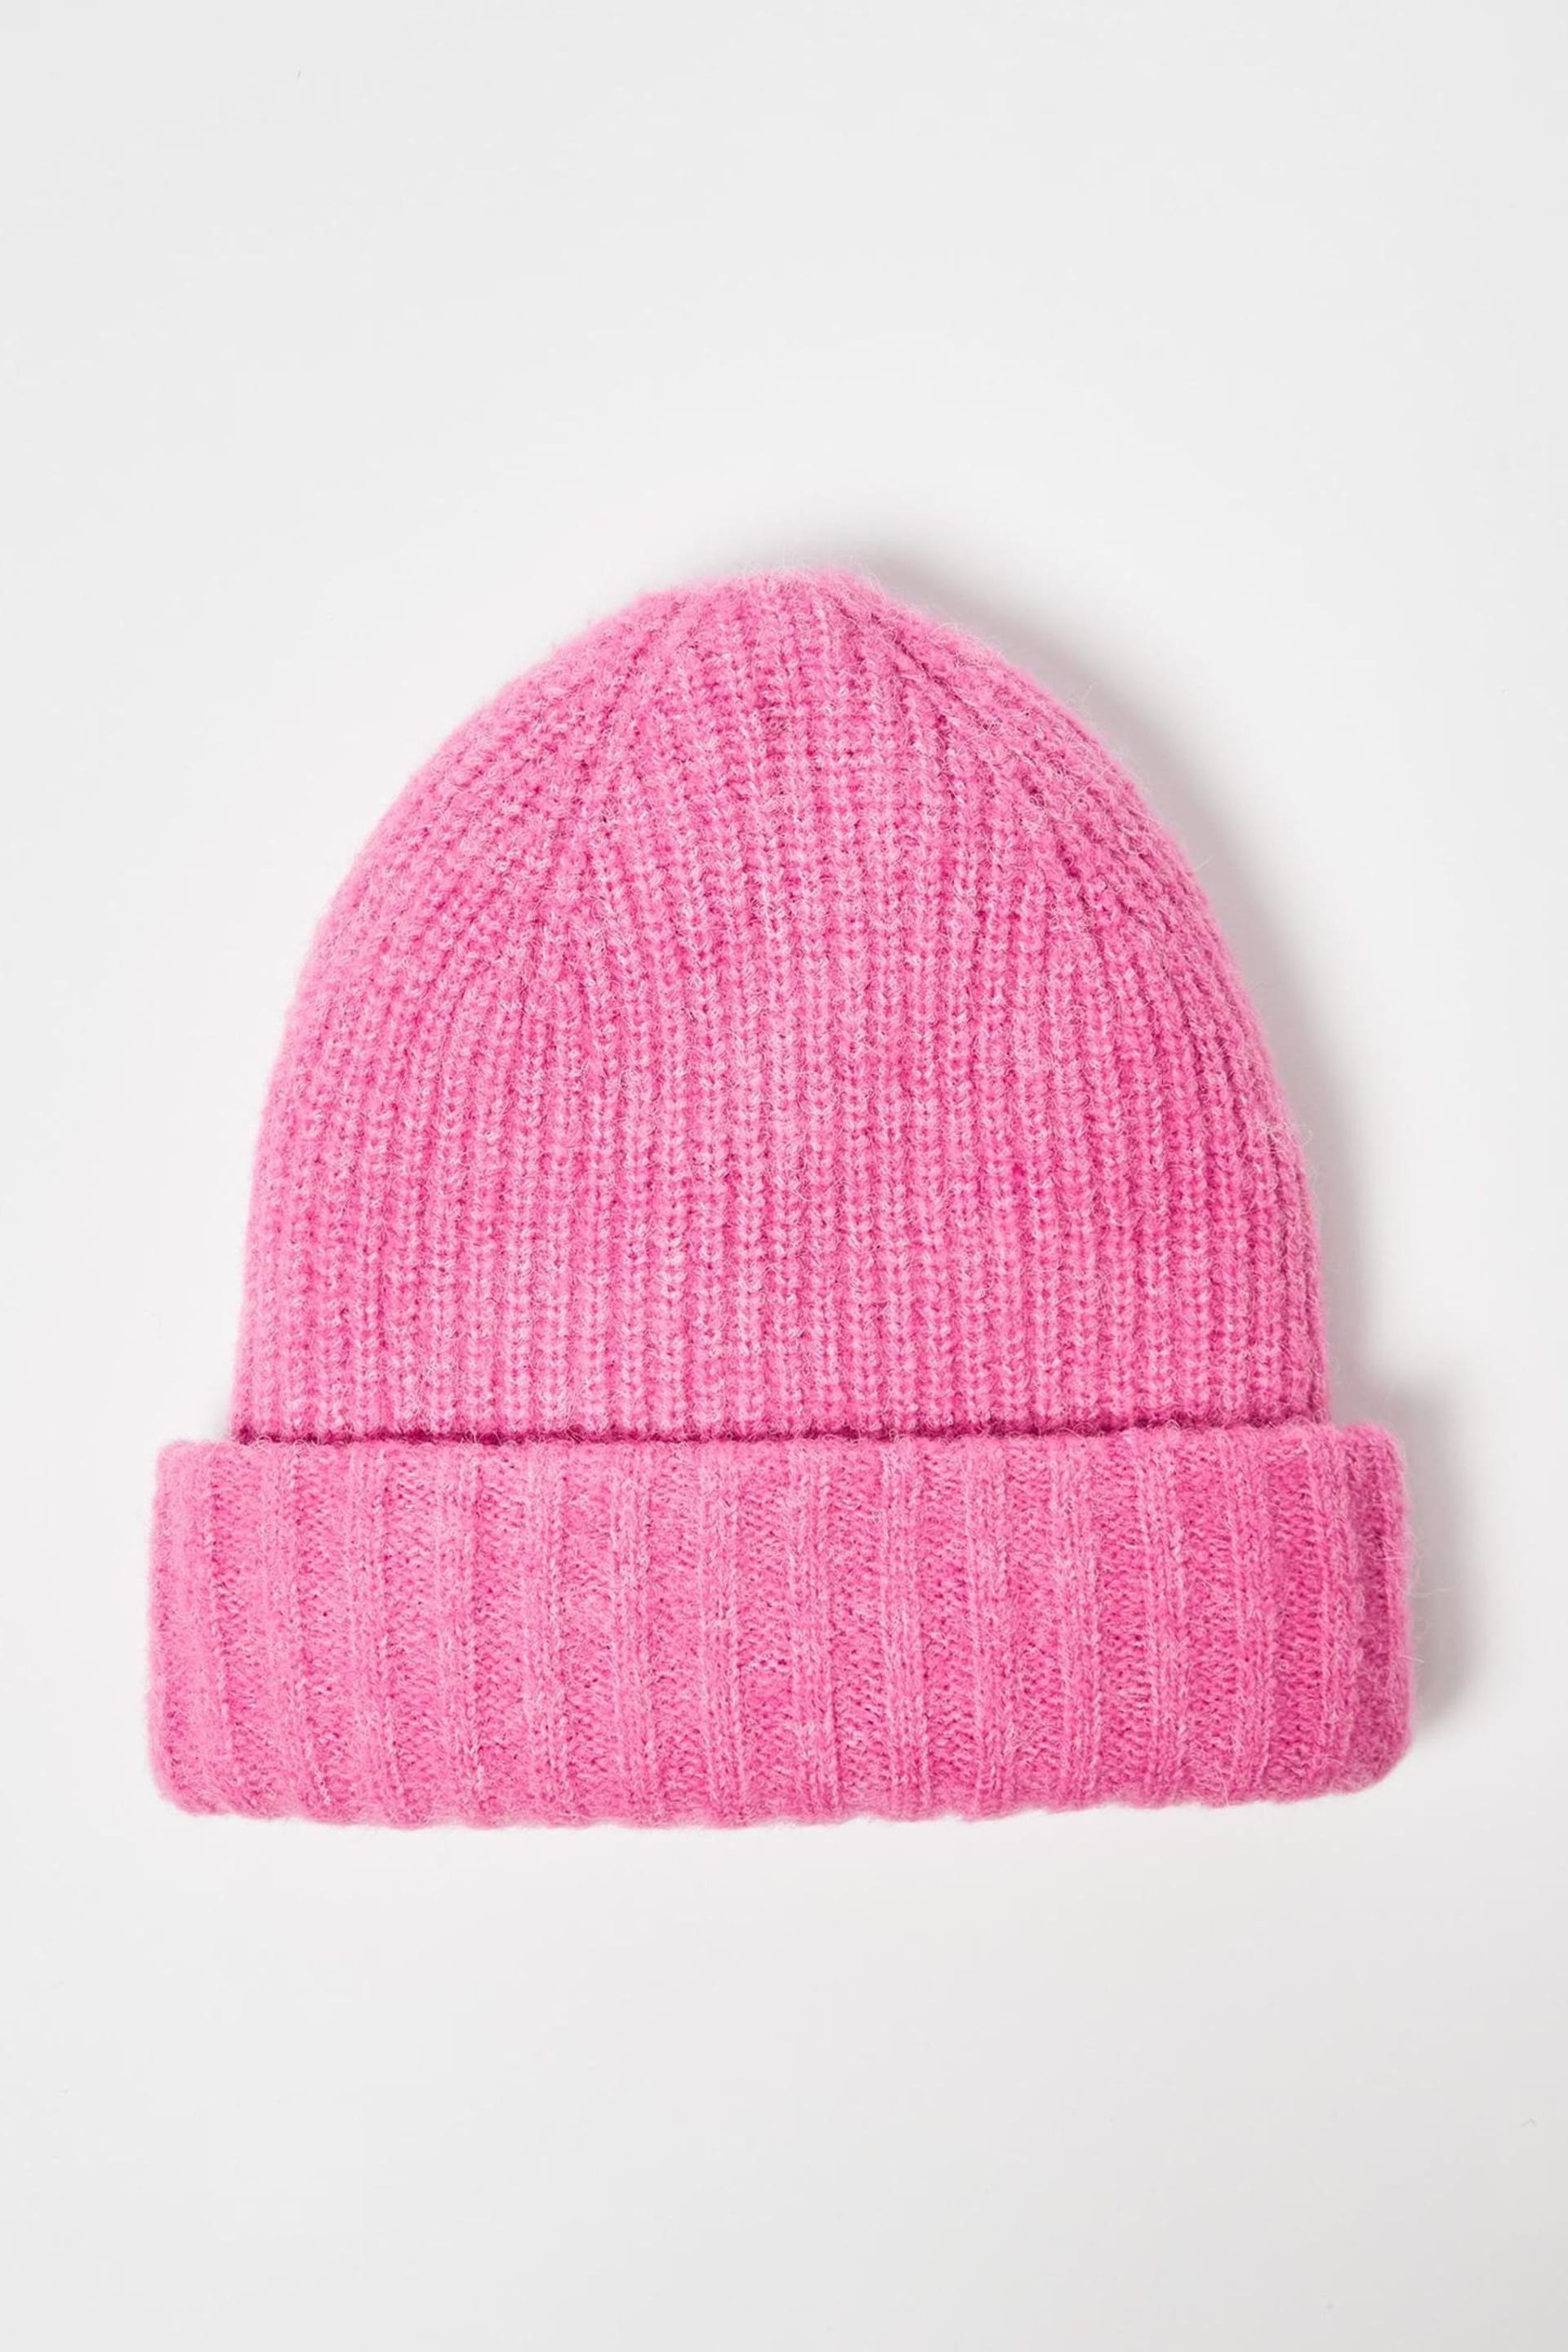 Oliver Bonas Pink Rib Knitted Beanie Hat - Image 1 of 4